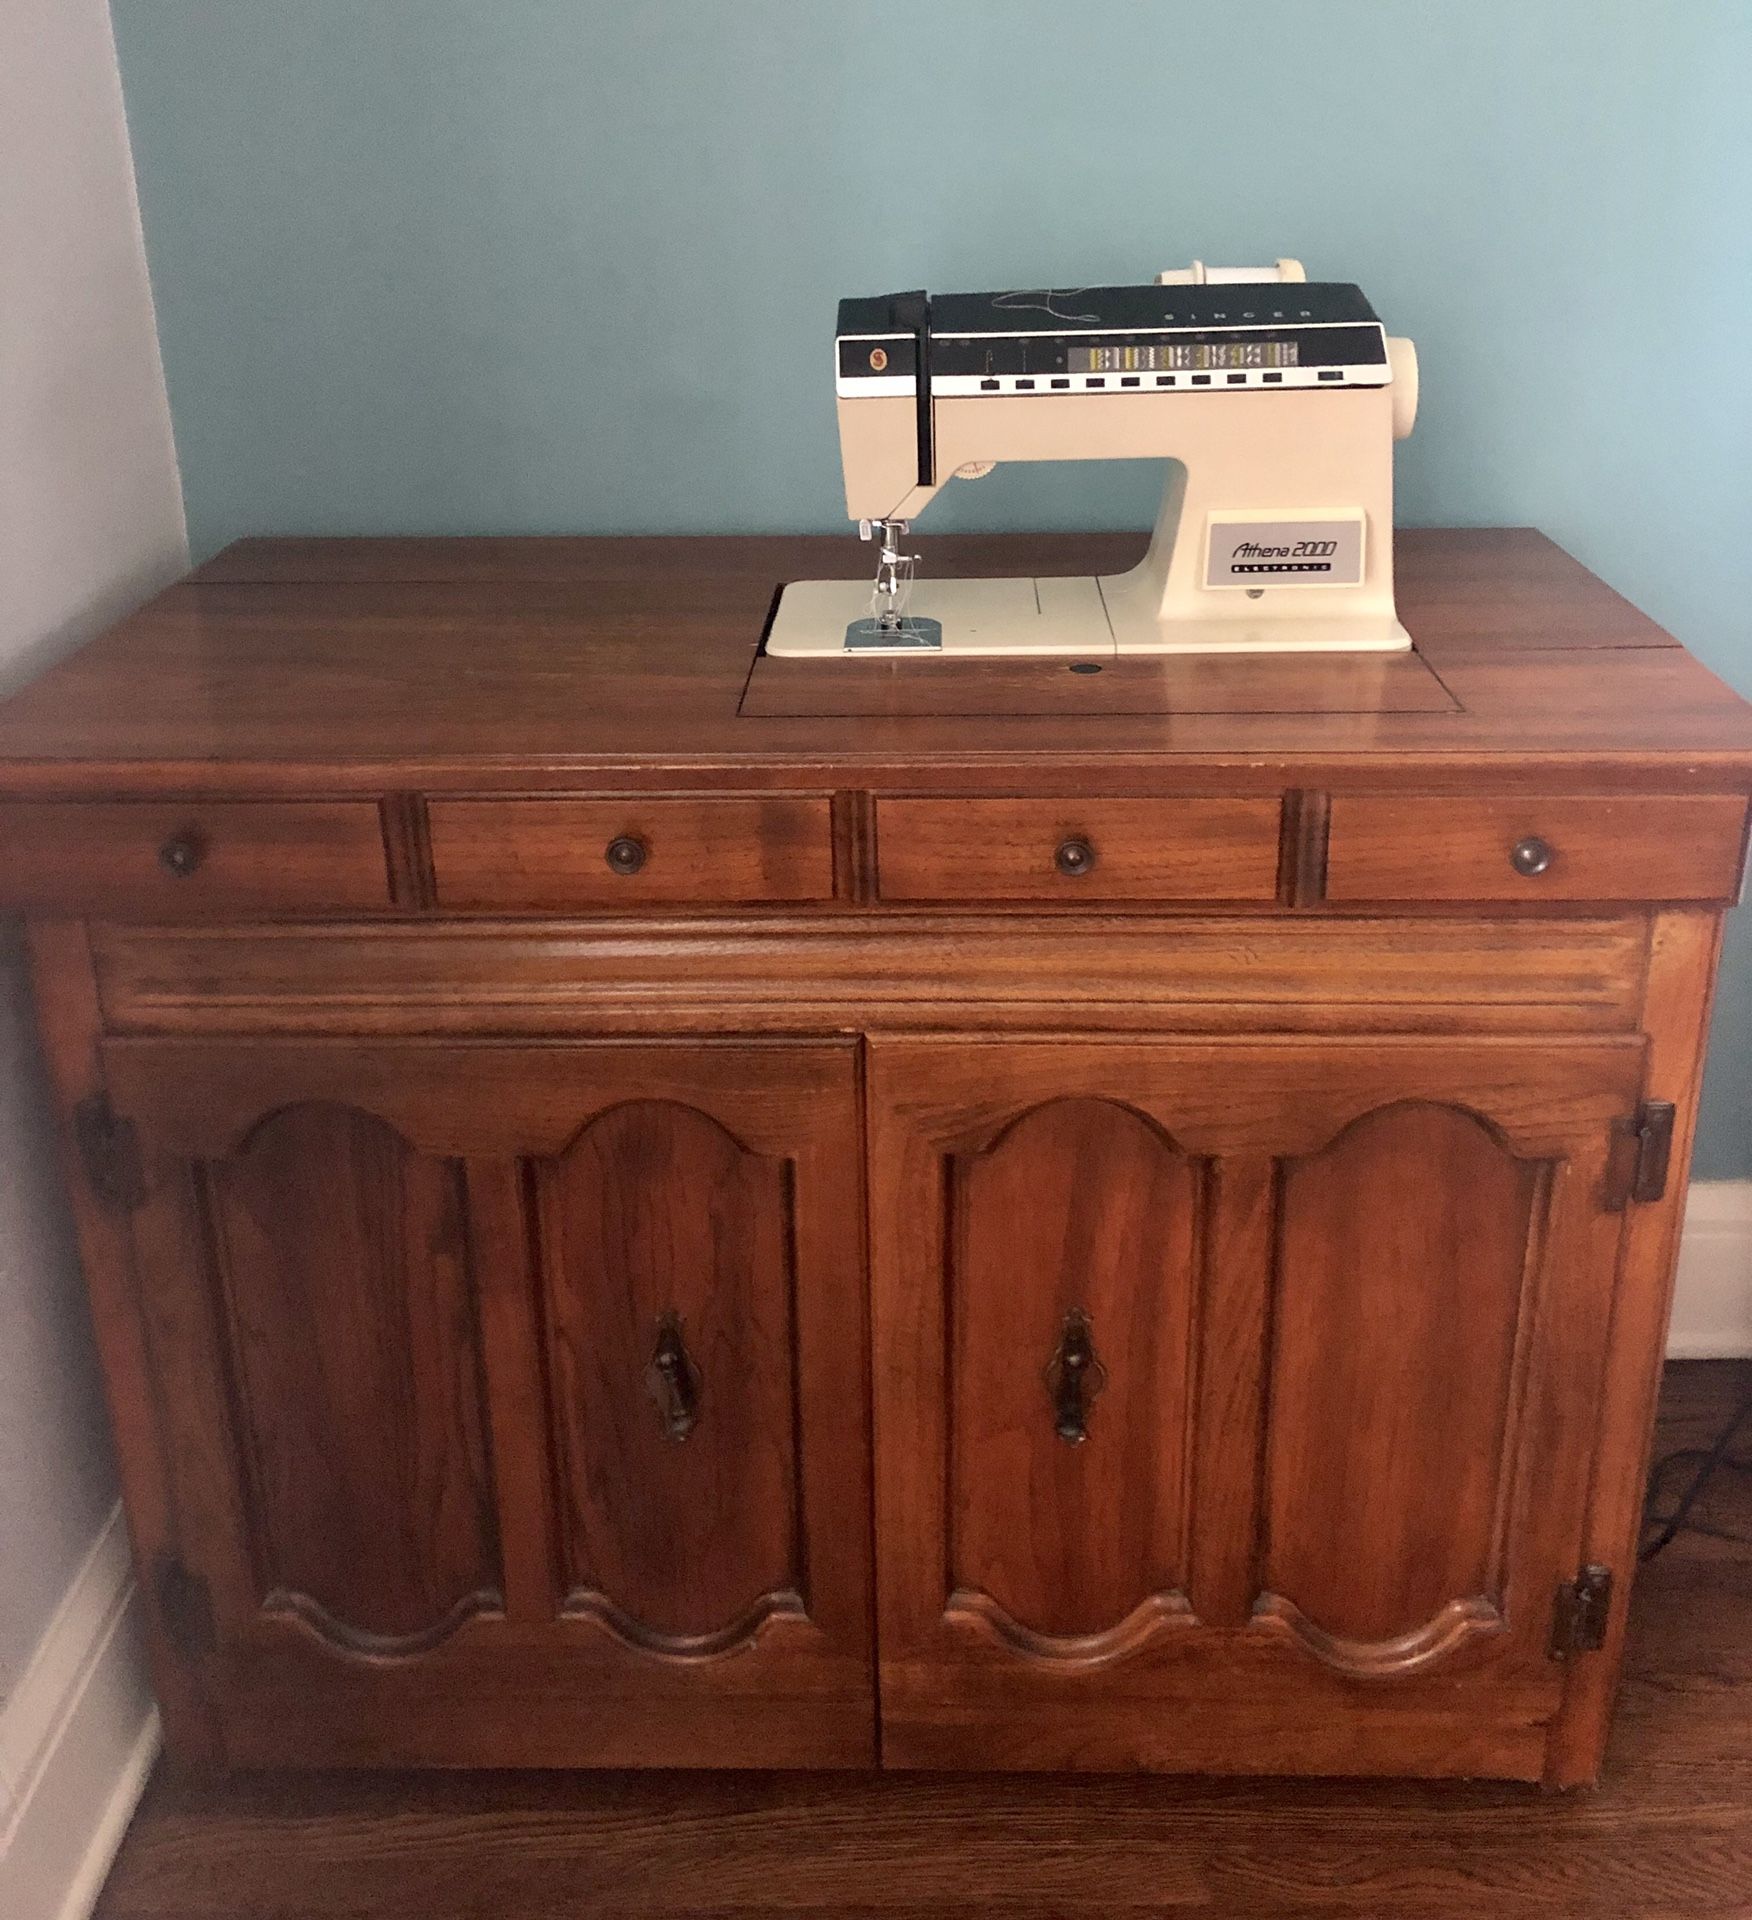 Oak Sewing Machine cabinet with Singer Athena 2000 Sewing Machine